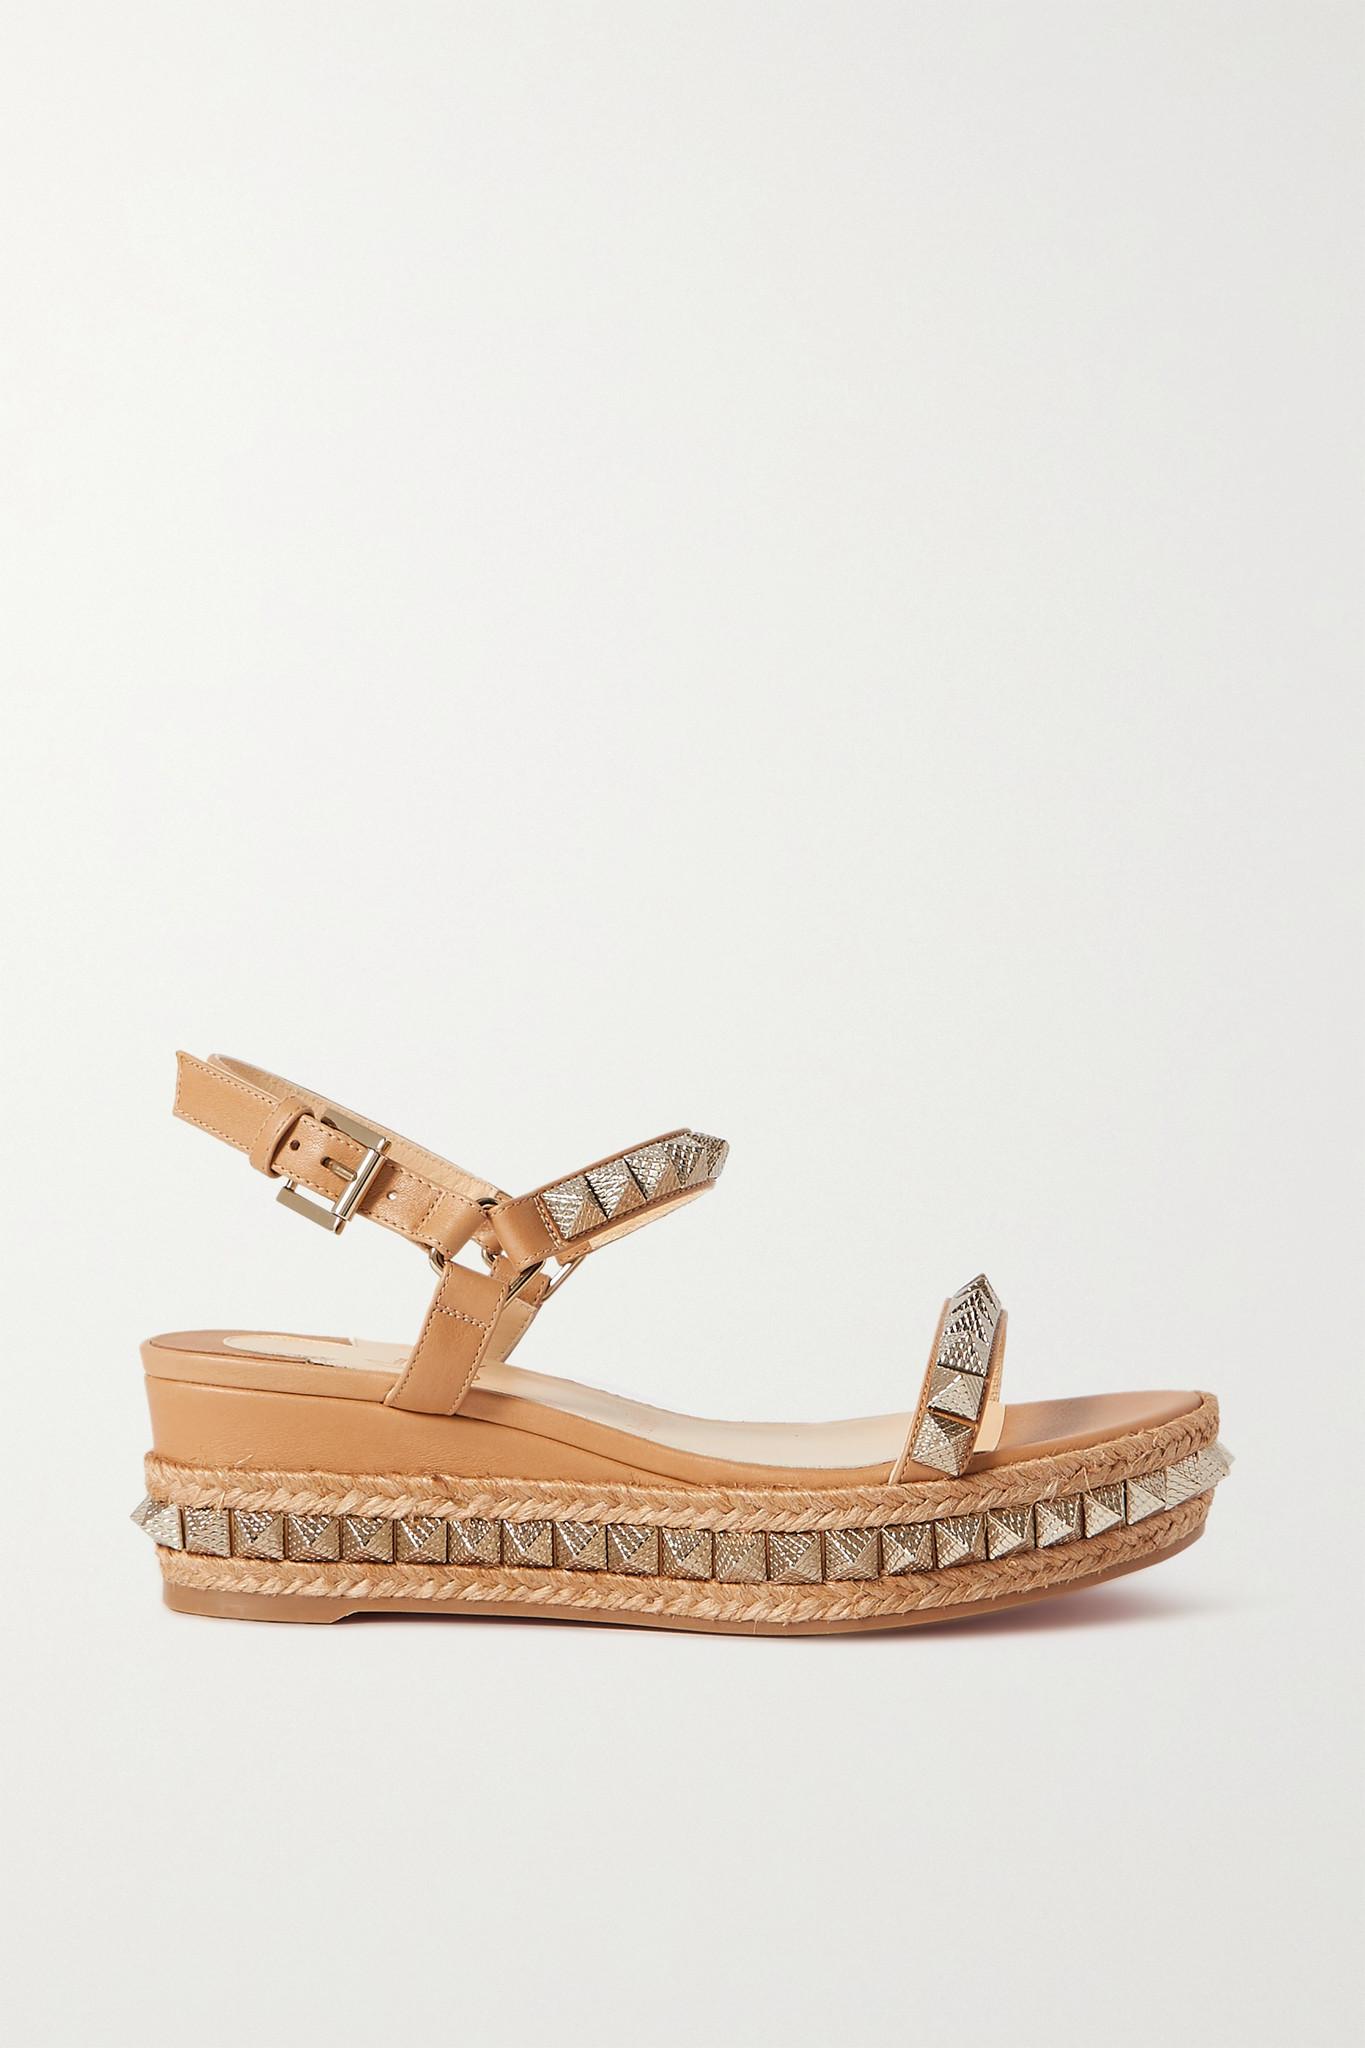 Efterforskning Stjerne Arctic Christian Louboutin Pyraclou 60 Studded Leather Wedge Sandals | Lyst